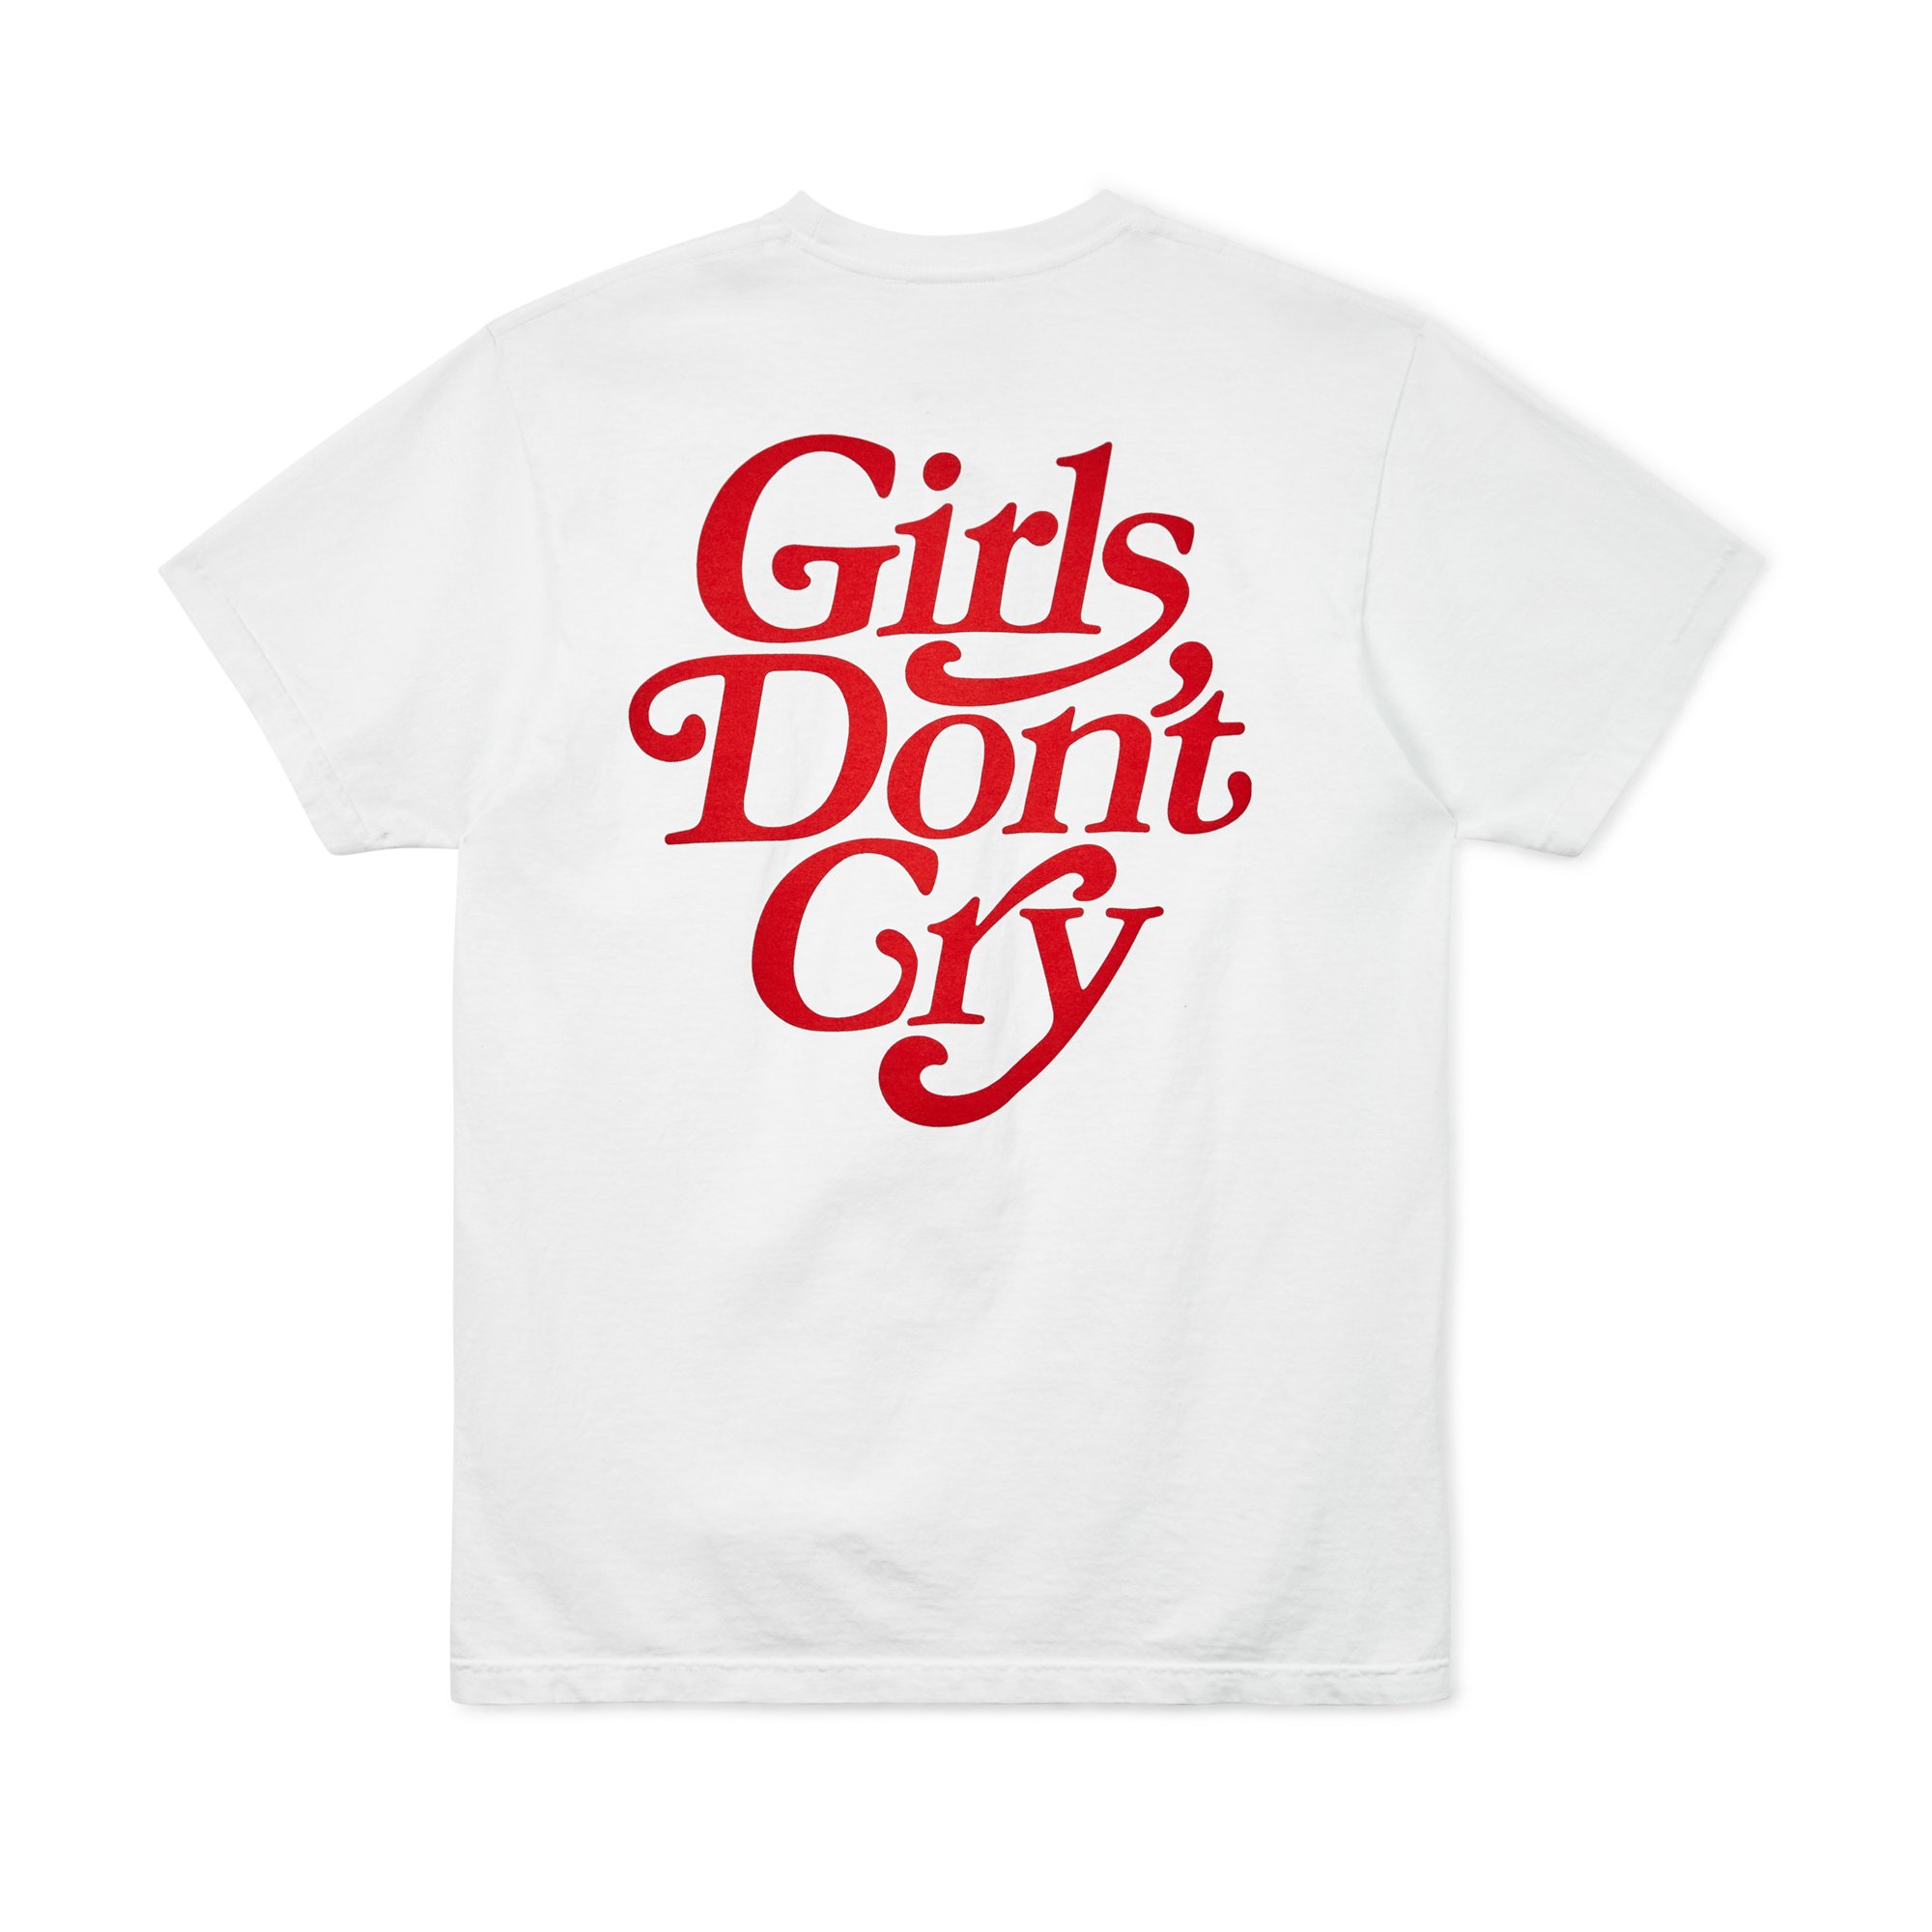 girls don't cry tee | myglobaltax.com